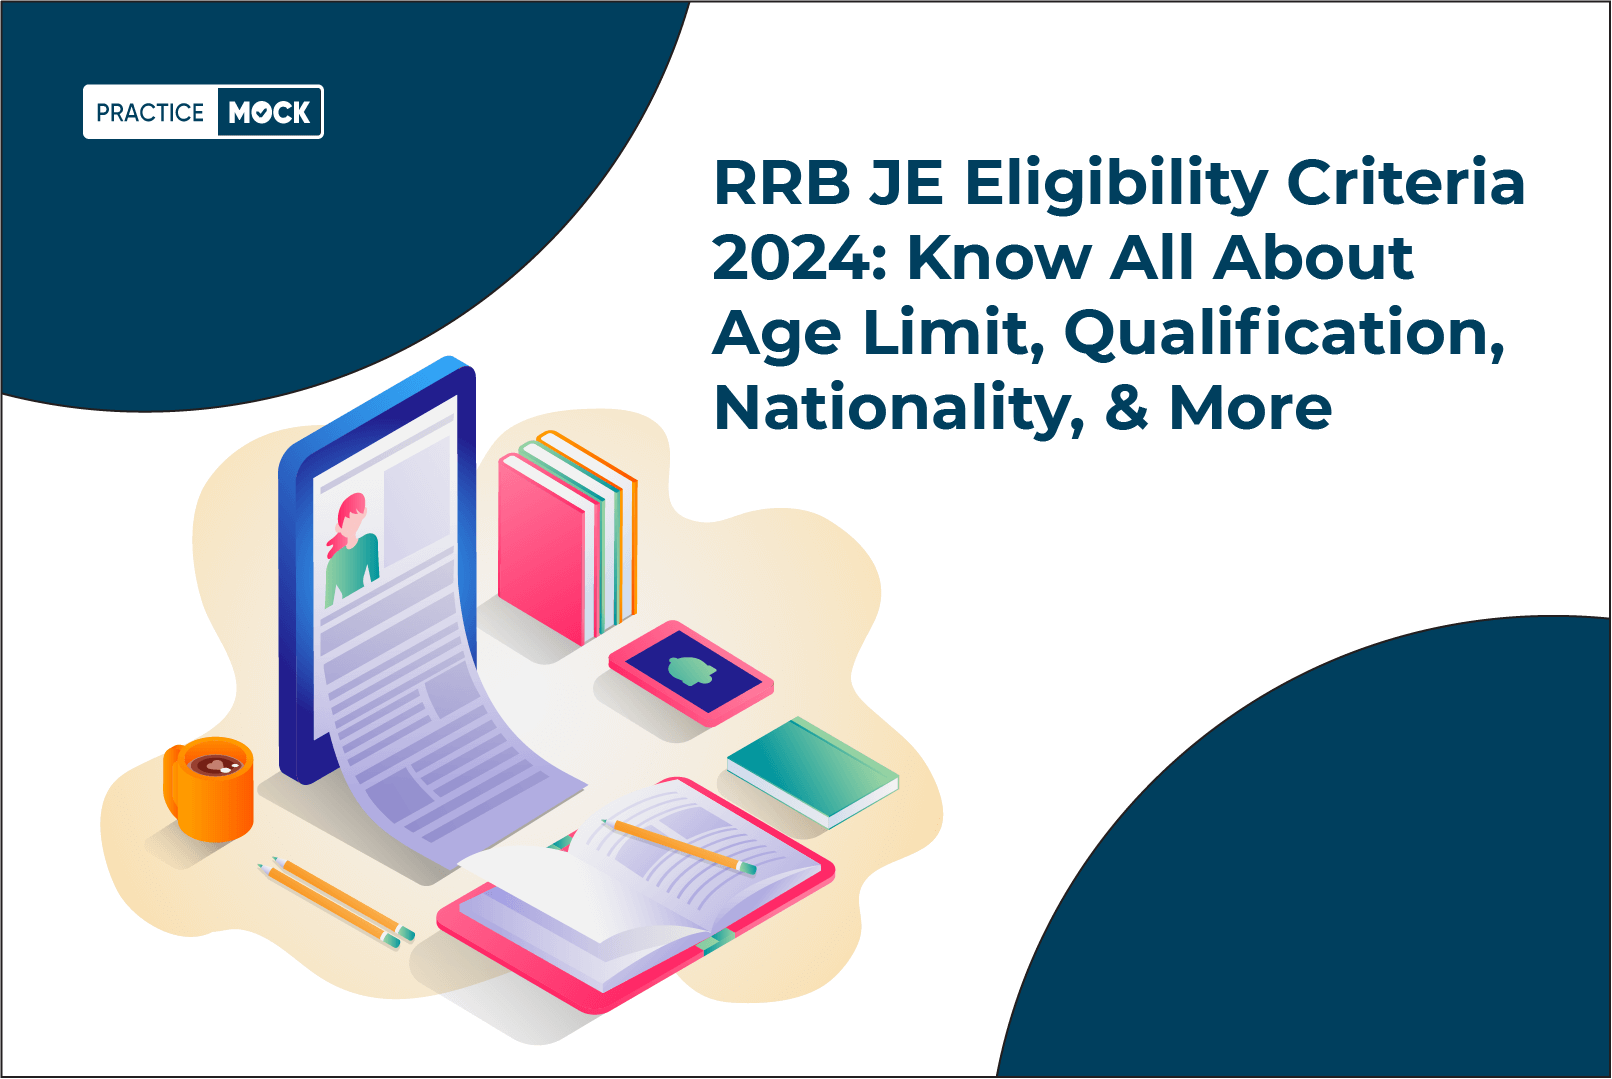 RRB JE Eligibility Criteria 2024: Know All About Age Limit, Qualification, Nationality, & More